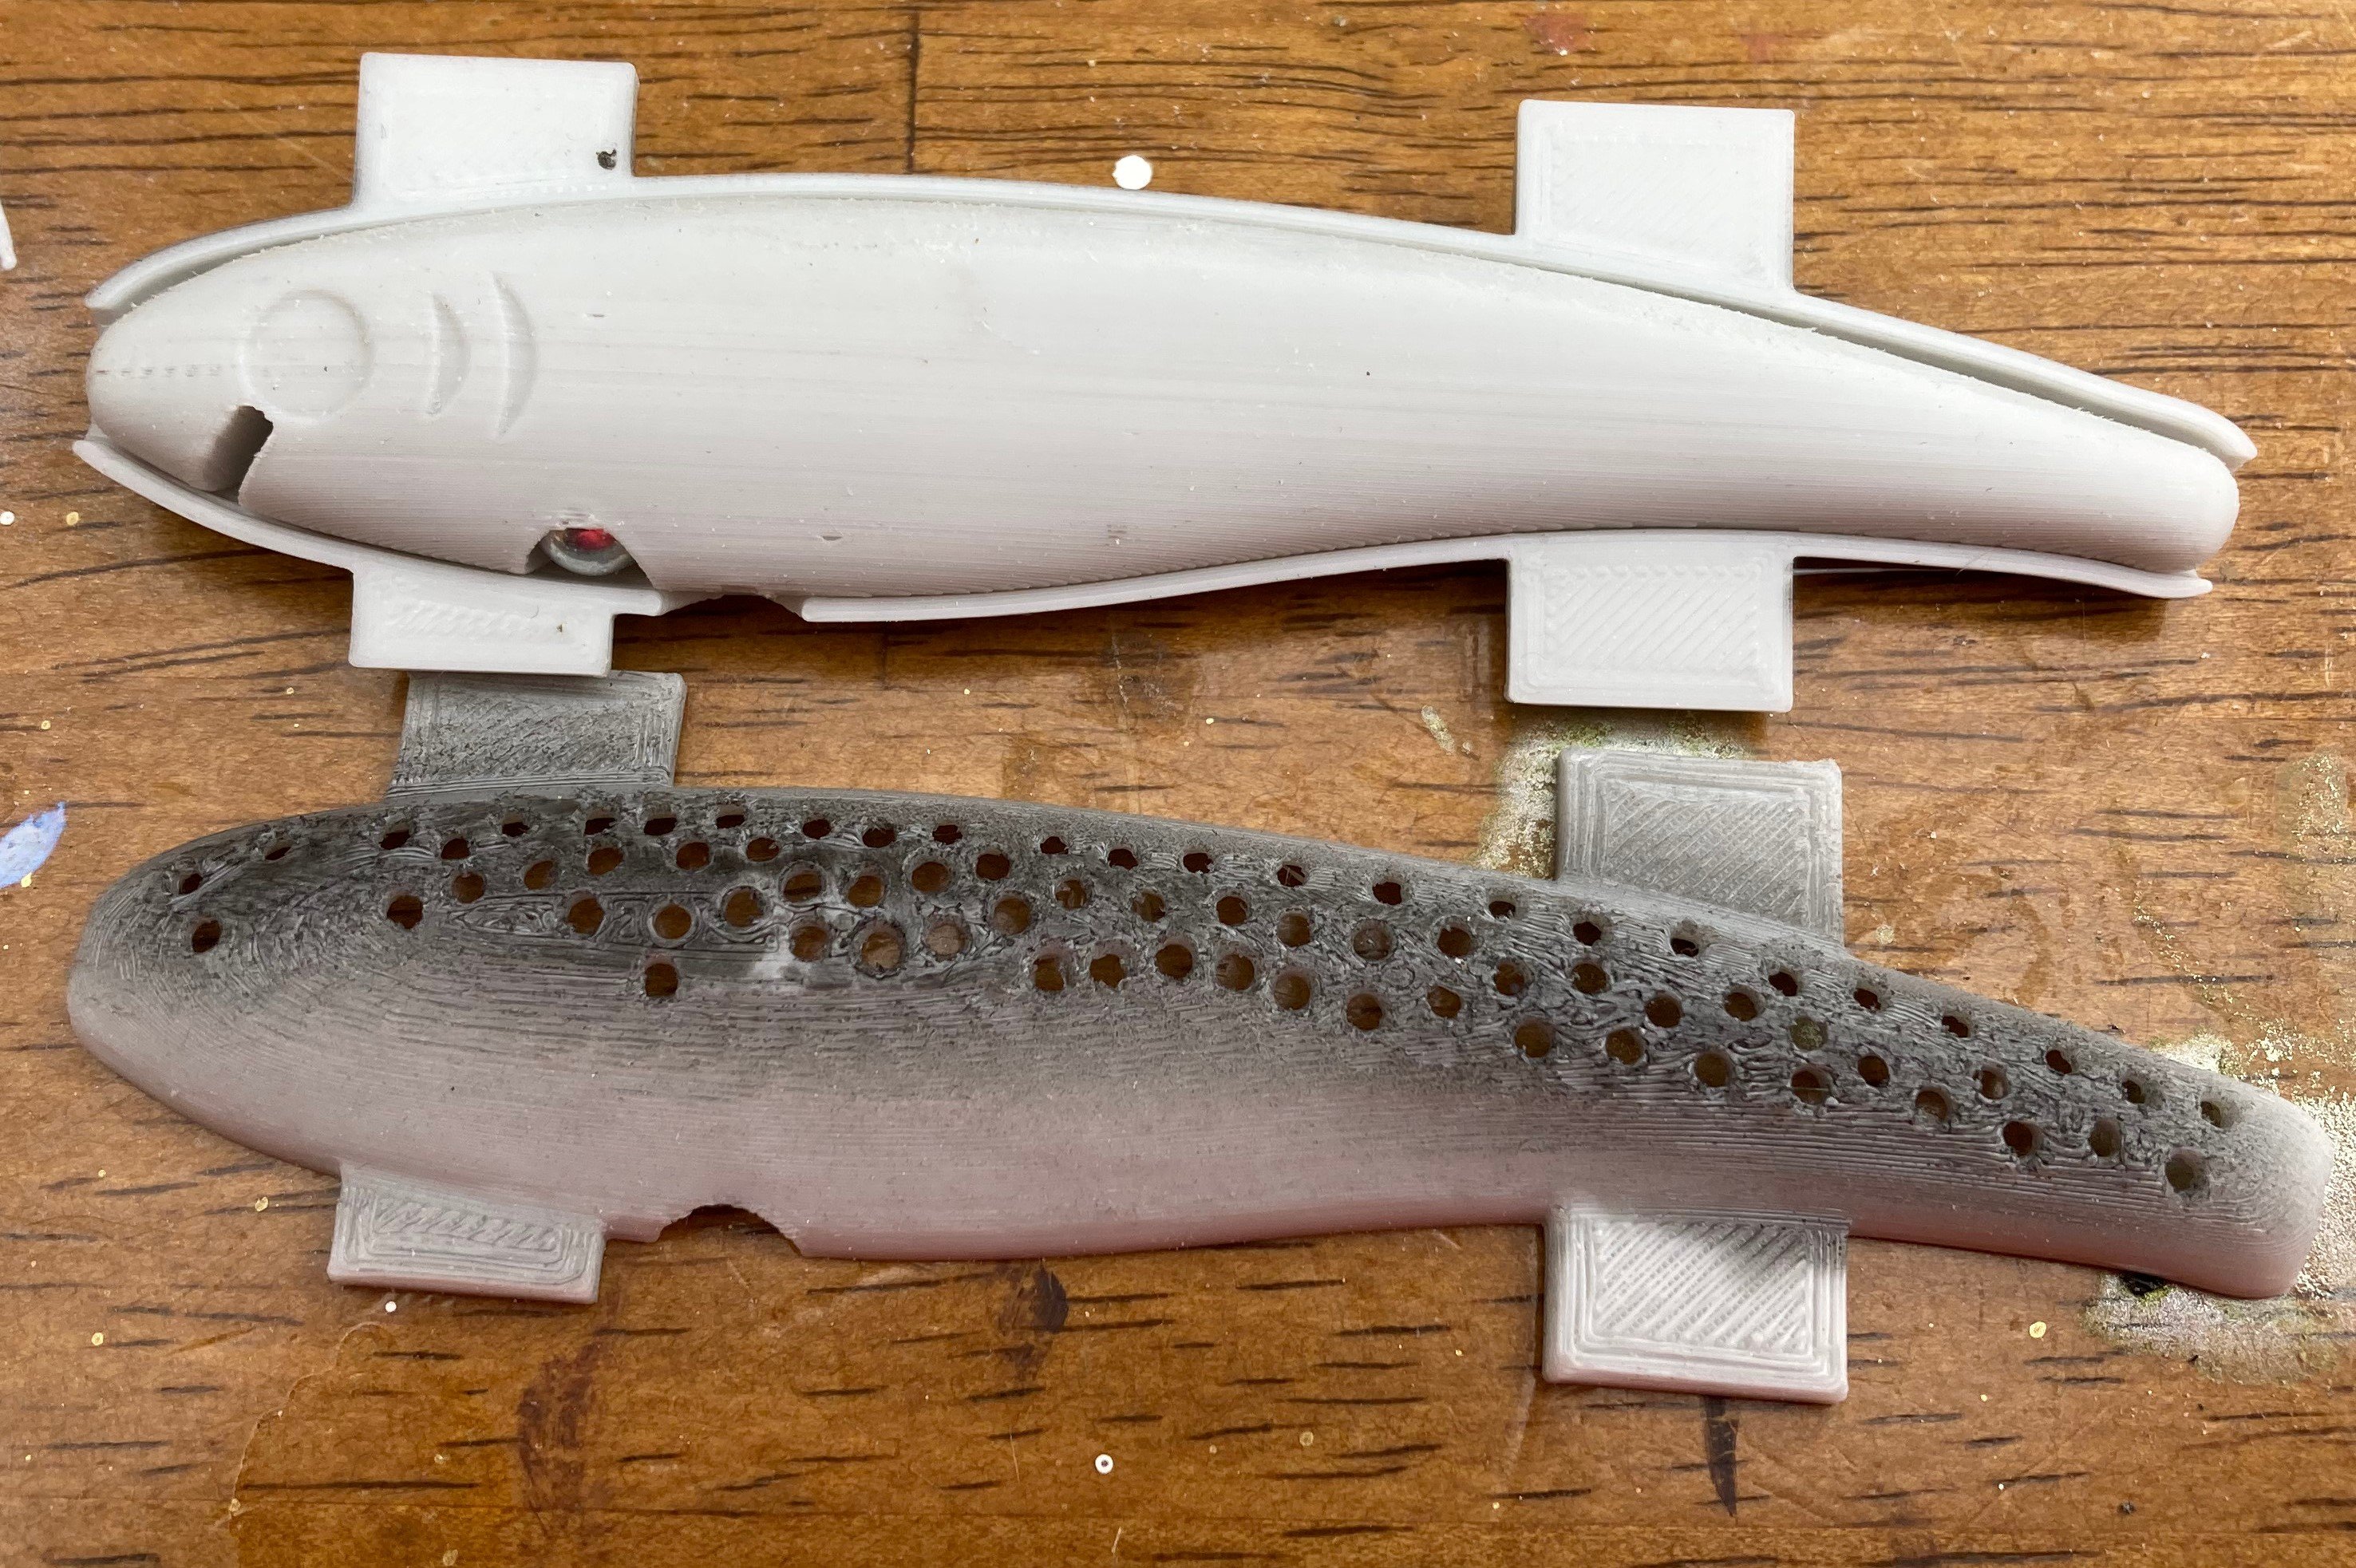 Another use for 3D printing Stencils - Hard Baits